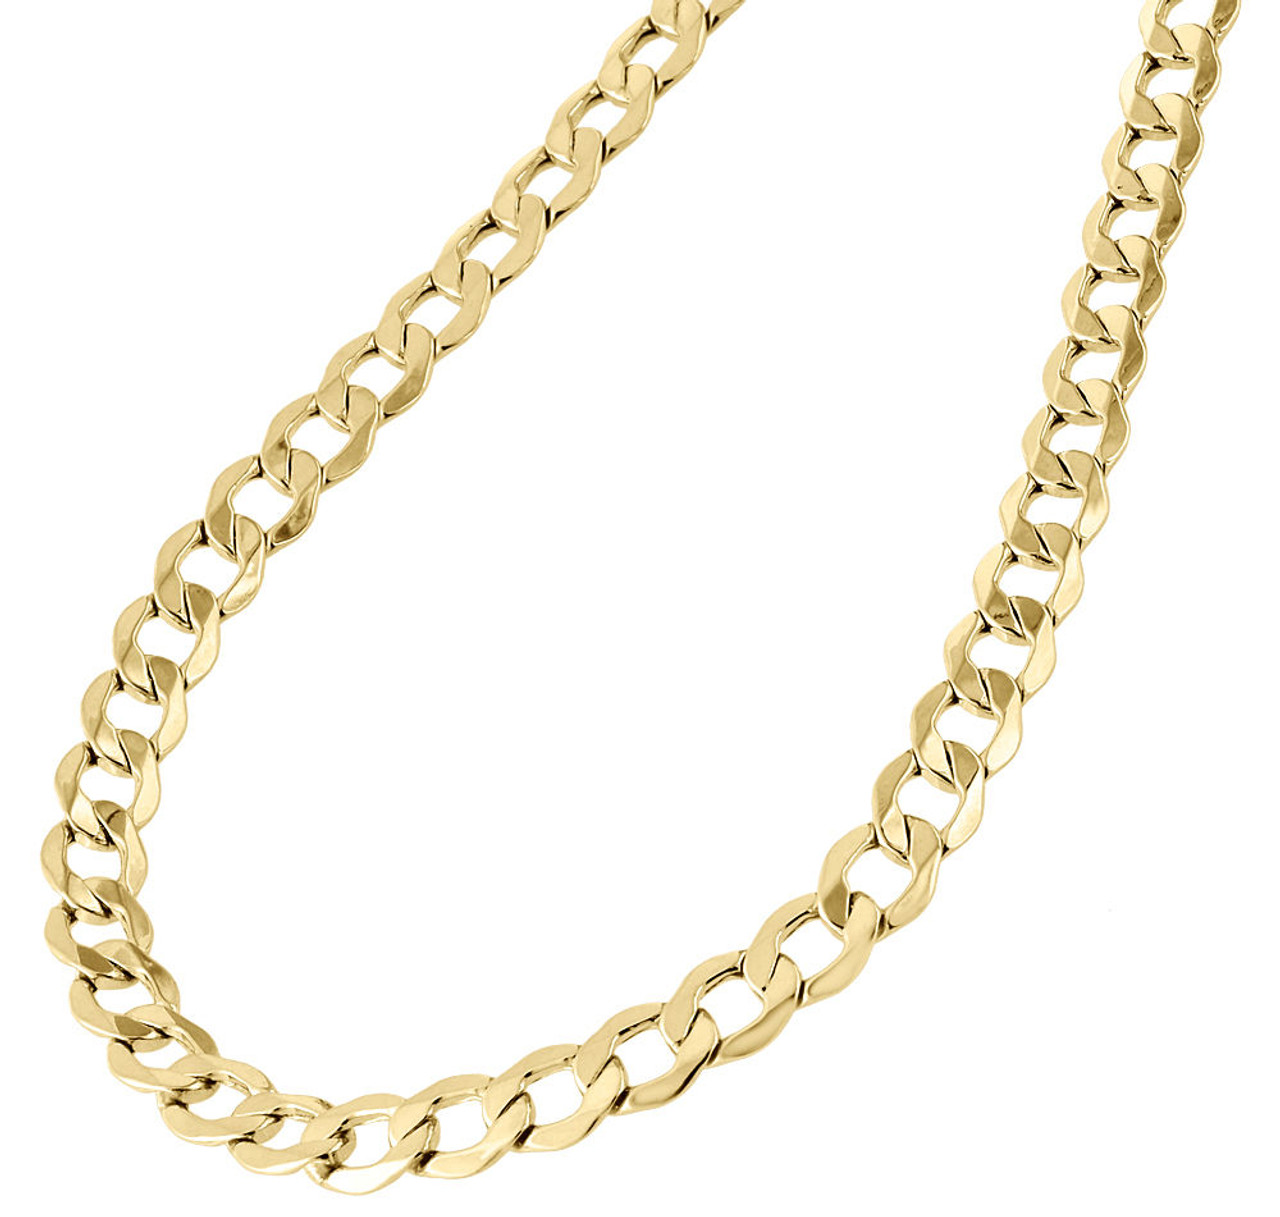 Men's Real 10K Yellow Gold Hollow Cuban Curb Link Chain Necklace 6.50mm 20-30